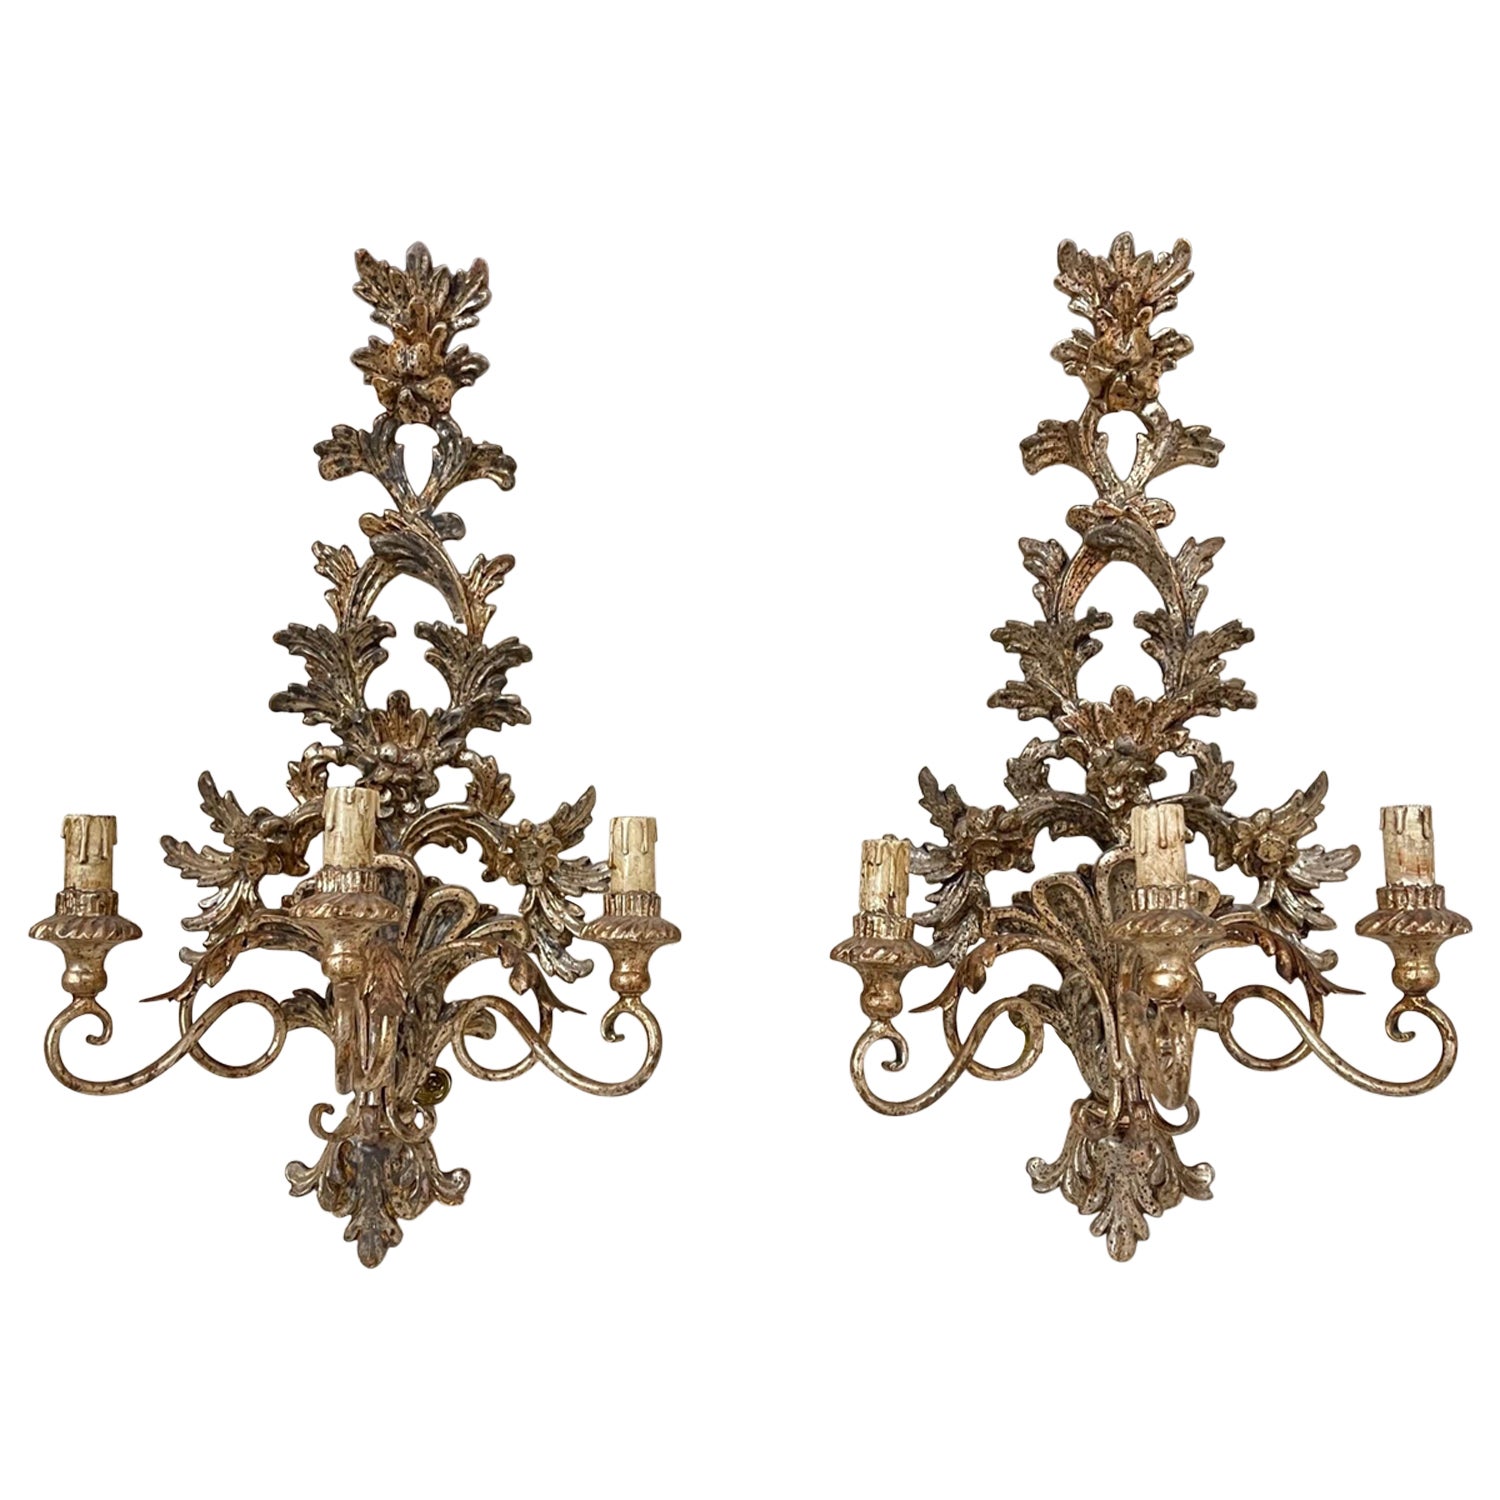 Pair of Antique Italian Carved and Polychromed Wood 3 Arm Chandeliers